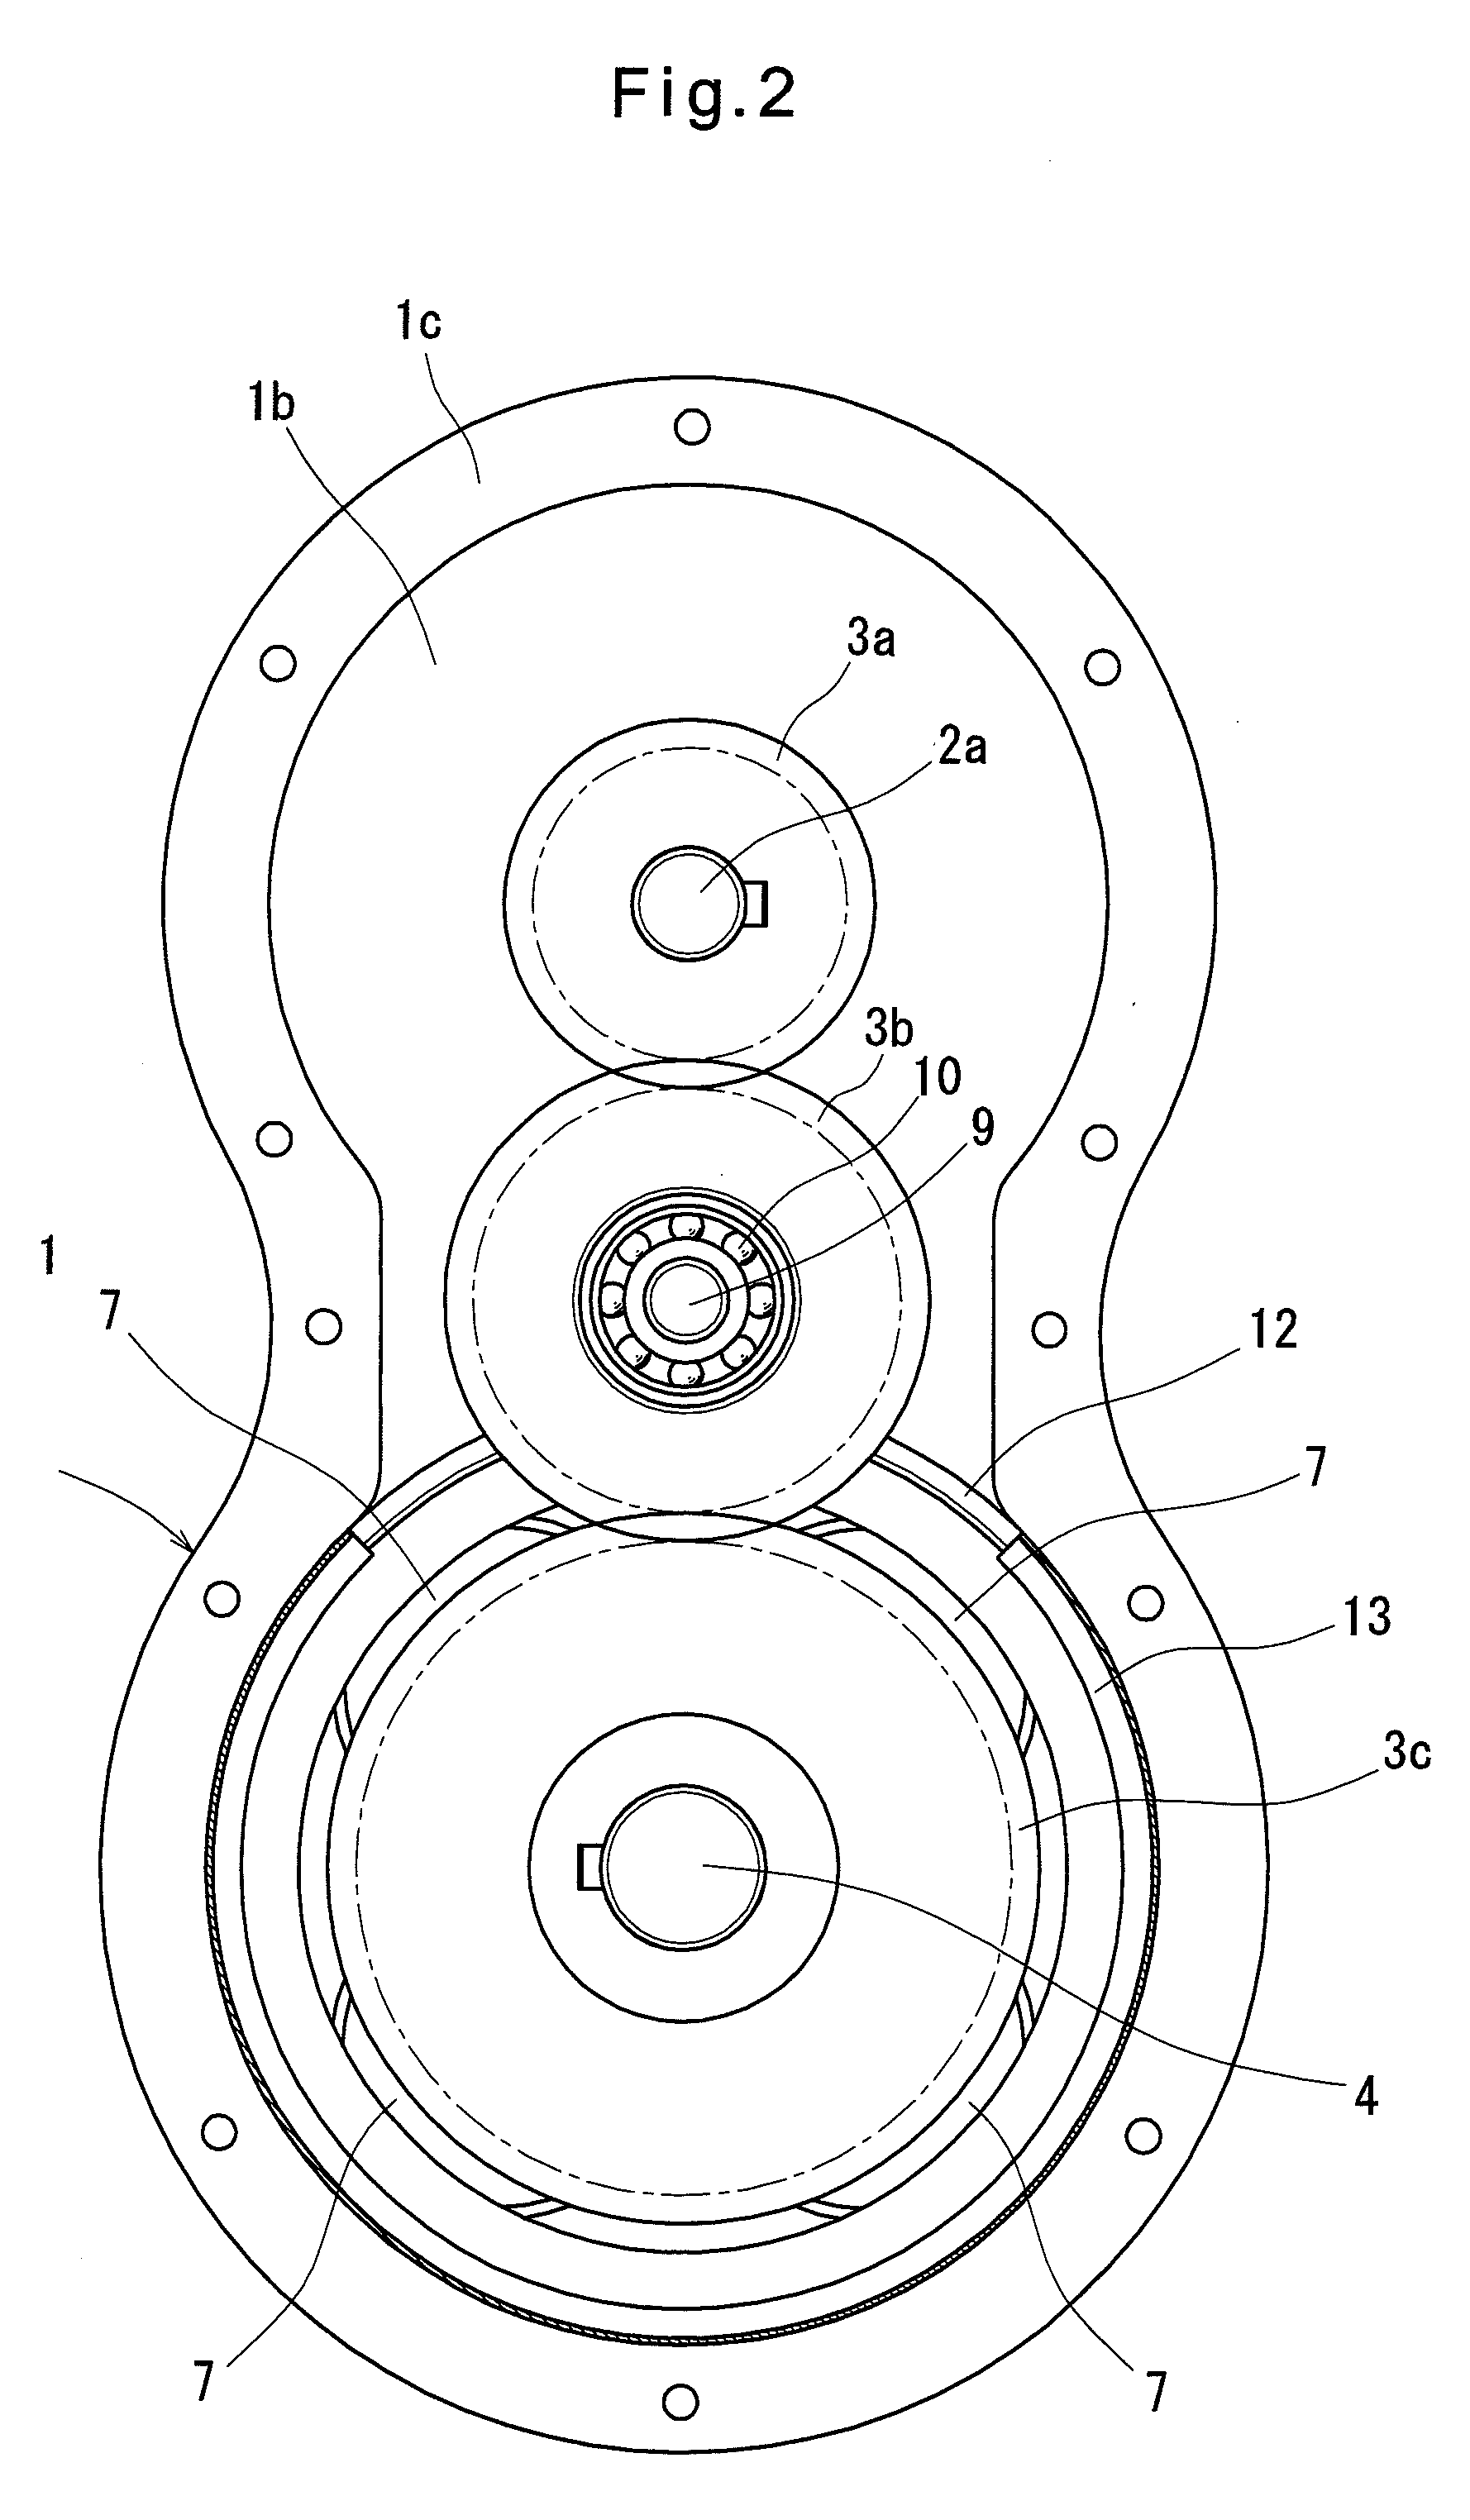 Electric linear motion actuator and electric brake assembly